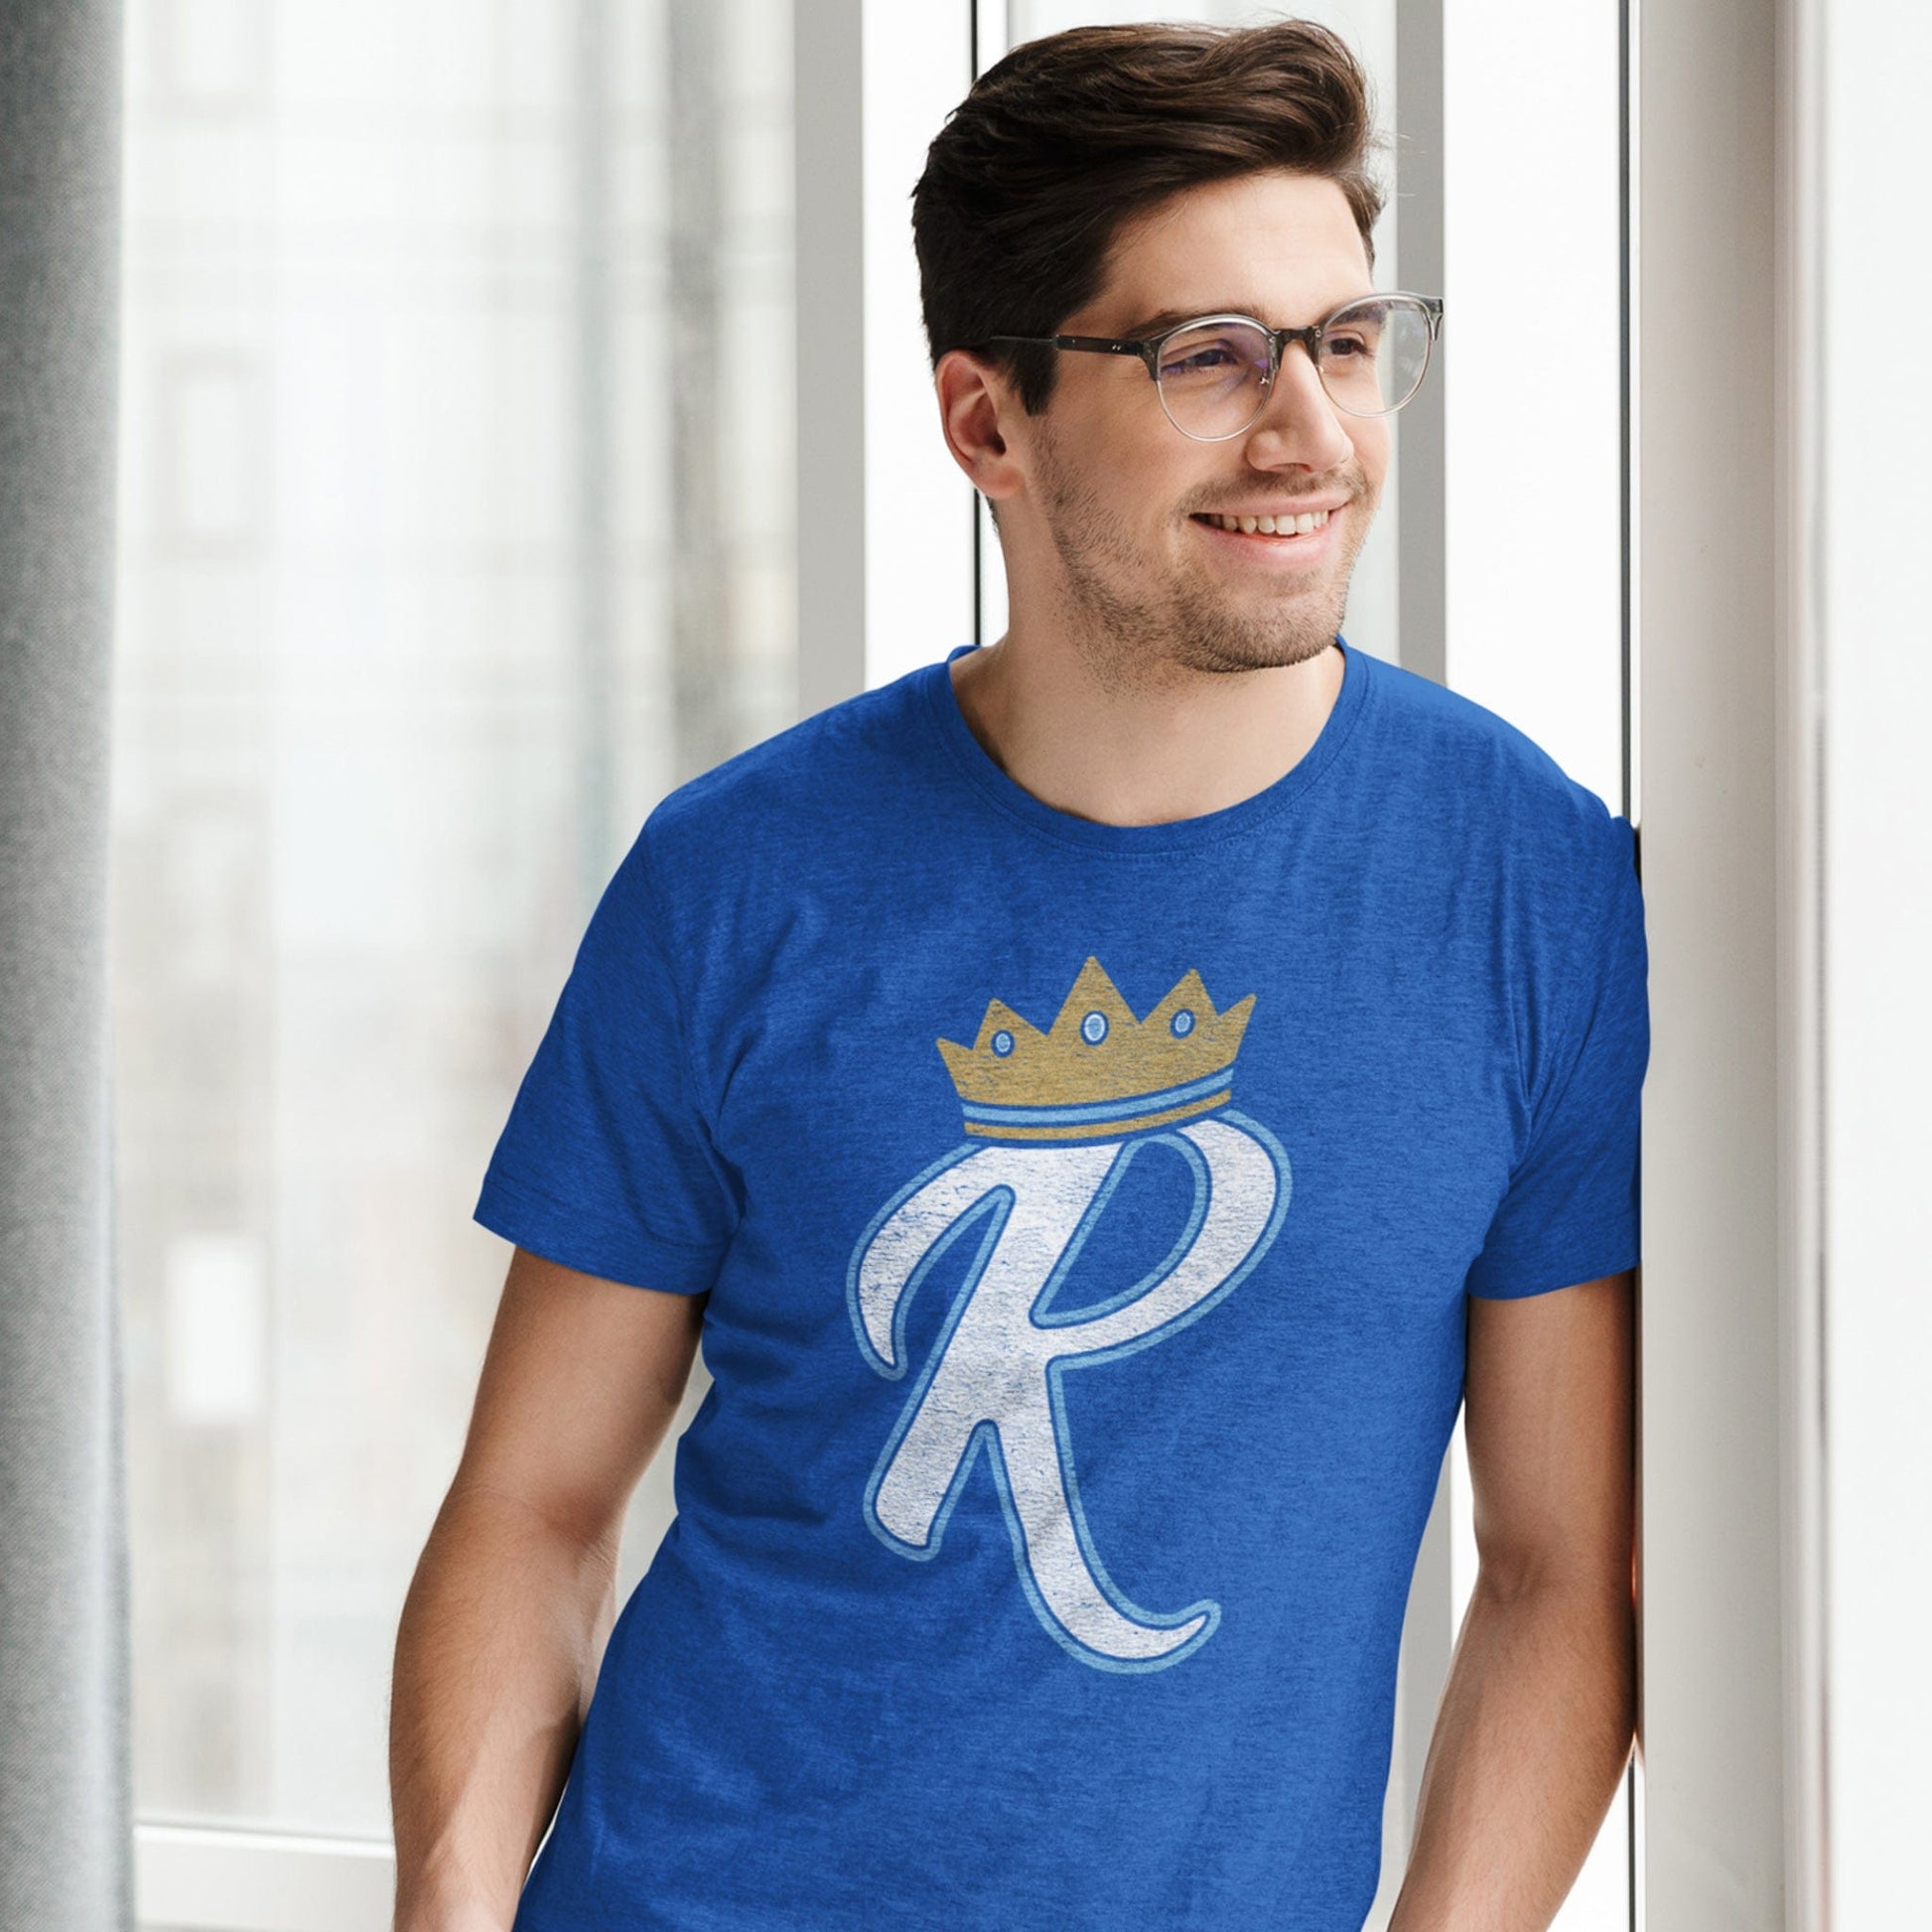 Kc Royals Classic T-Shirt for Sale by Robert44